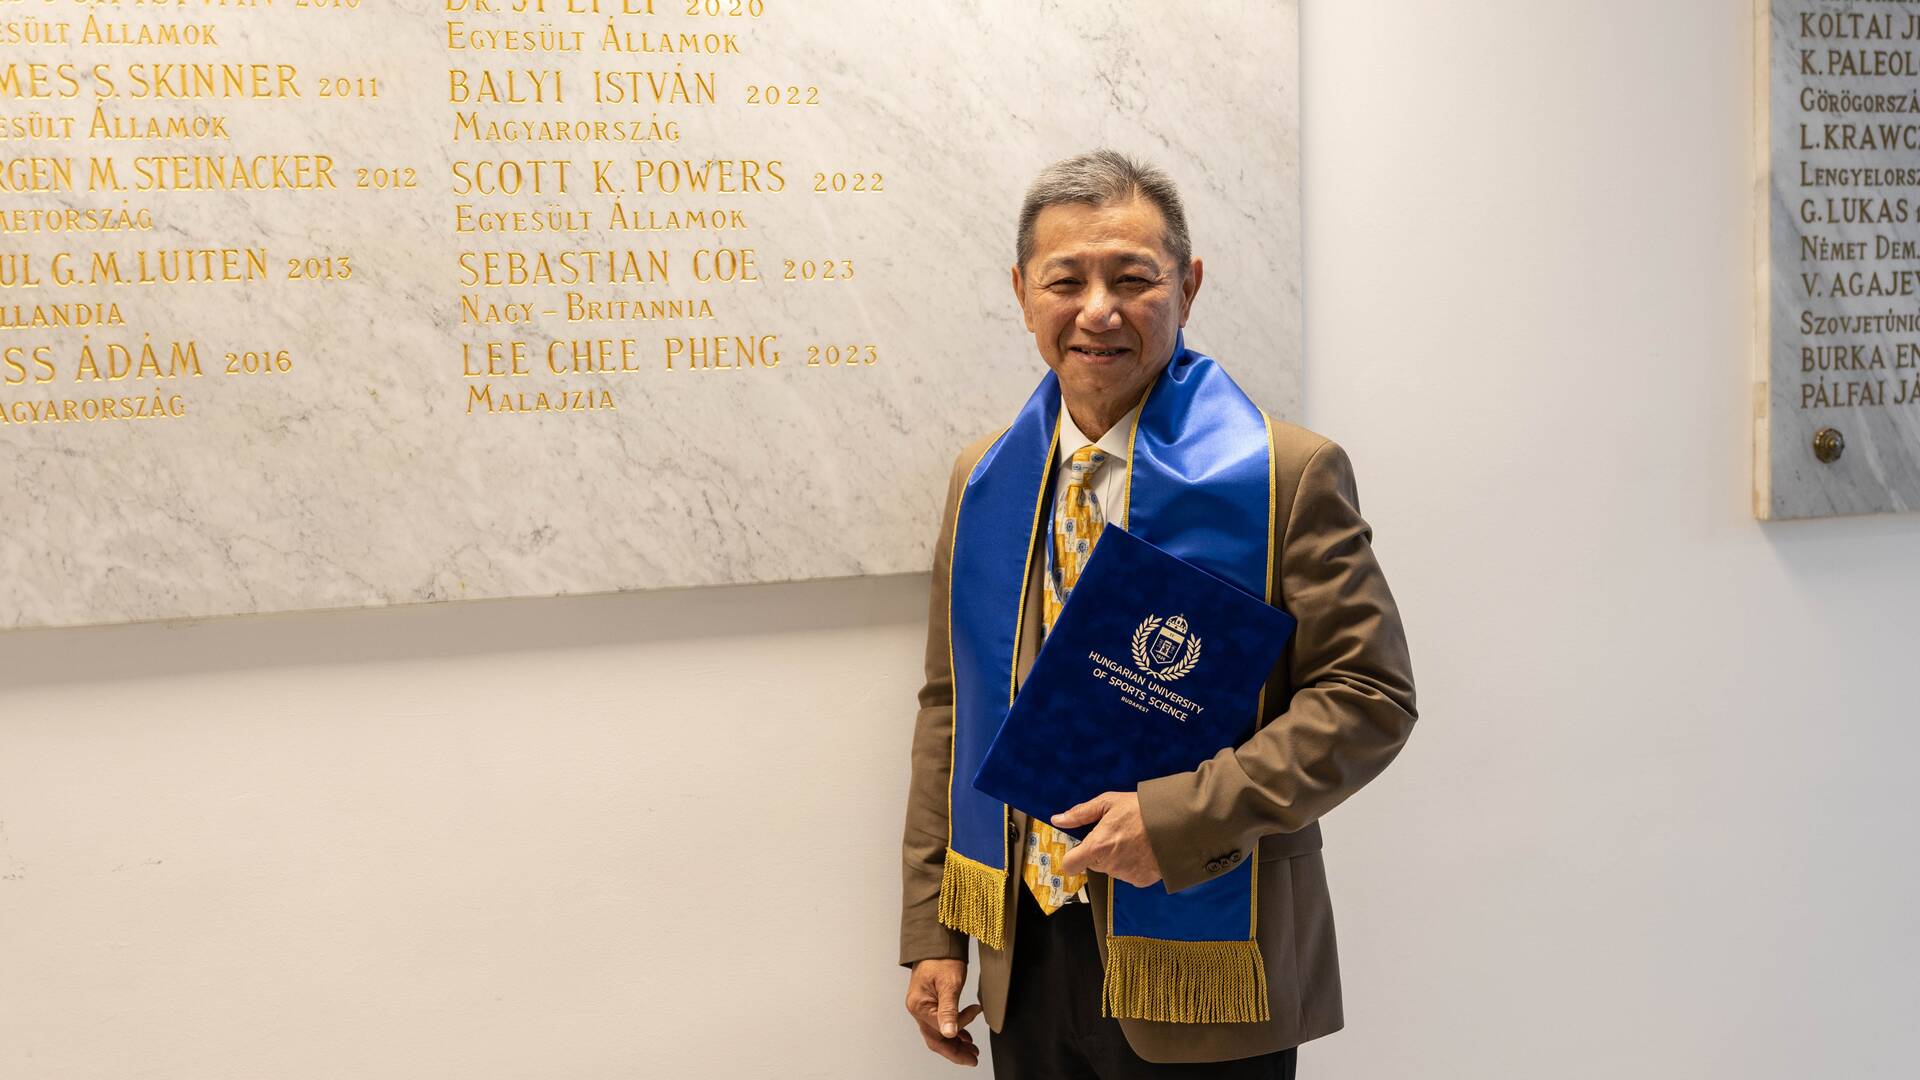 Lee Chee Pheng receives honorary doctorate degree at HUSS